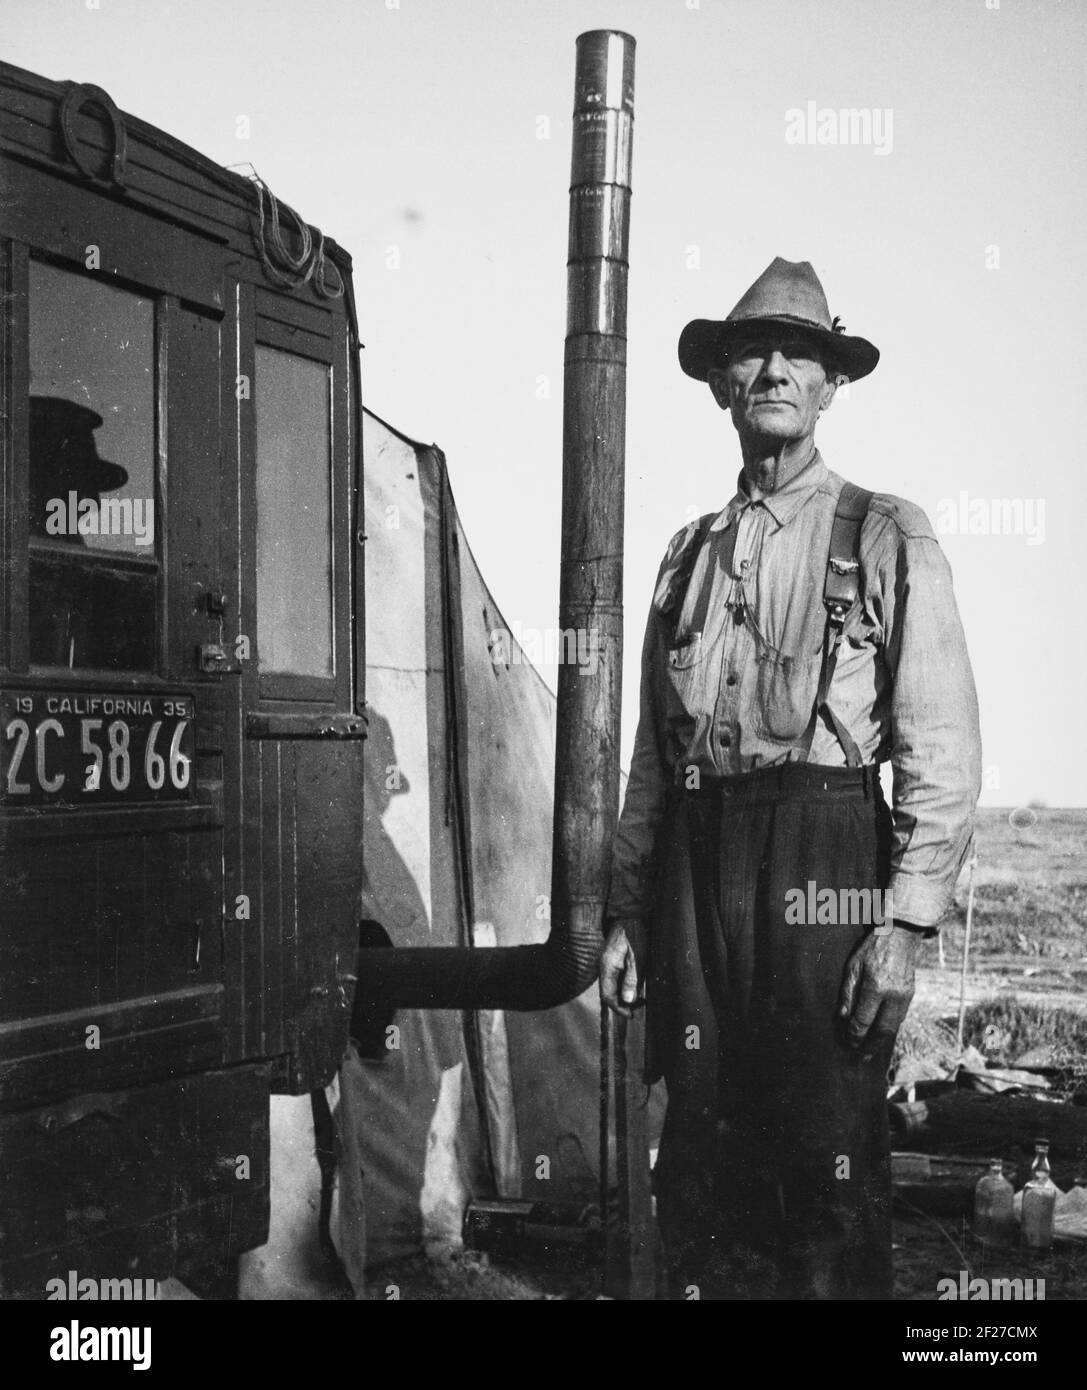 Photograph shows a man, three-quarter length portrait, standing next to tent dwelling with chimney, possibly attached to motor vehicle. . 1935. Photograph by Dorothea Lange Stock Photo